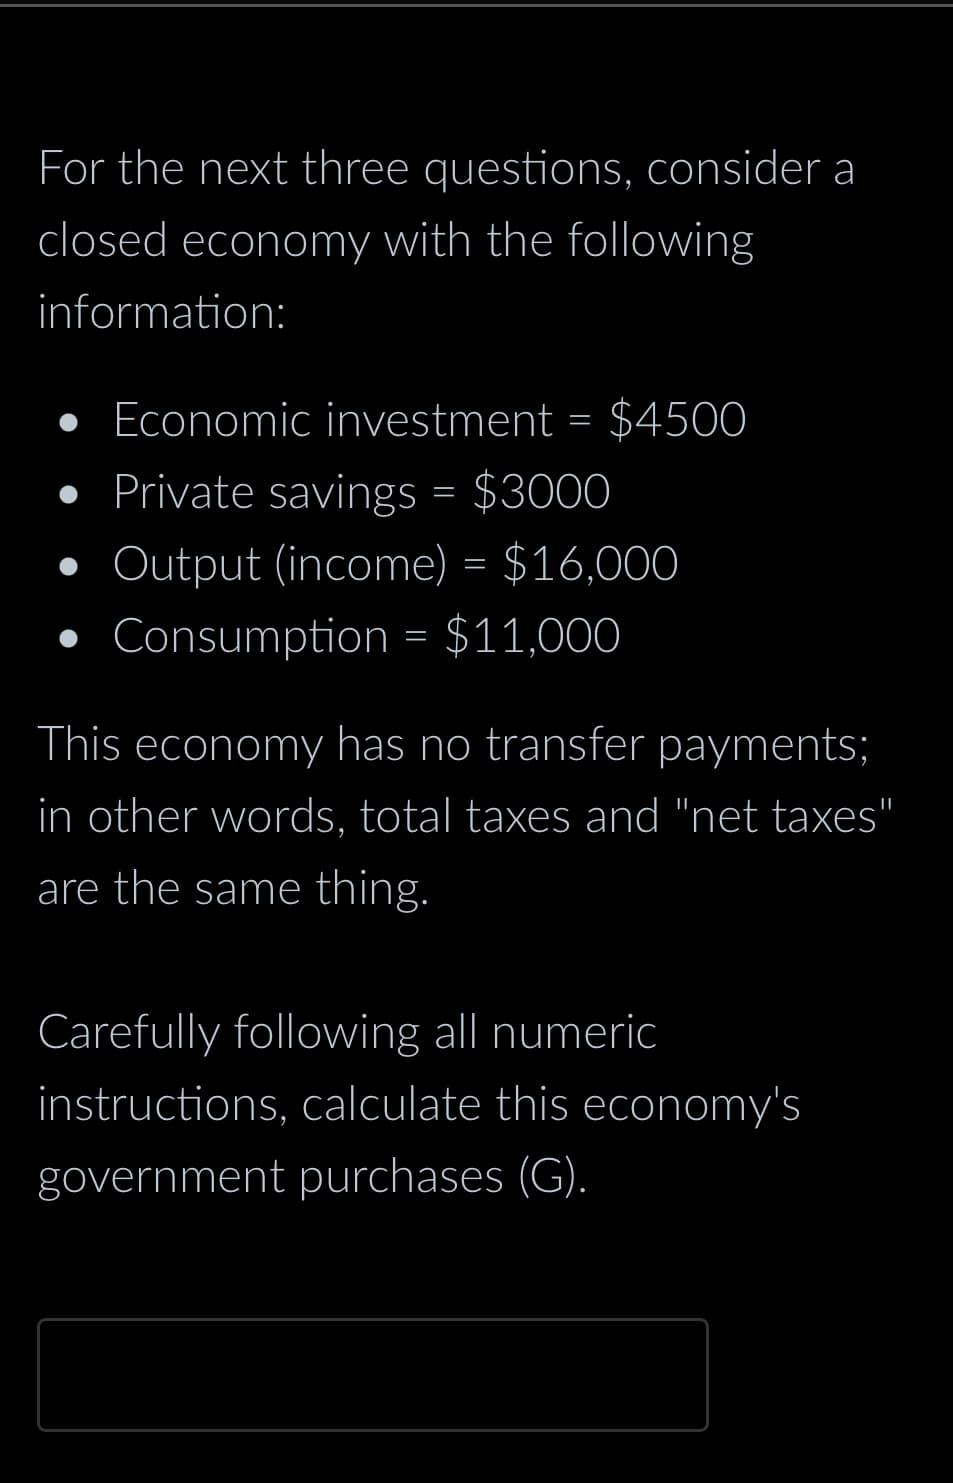 For the next three questions, consider a
closed economy with the following
information:
Economic investment = $4500
• Private savings = $3000
Output (income) = $16,000
• Consumption = $11,000
This economy has no transfer payments;
in other words, total taxes and "net taxes"
are the same thing.
Carefully following all numeric
instructions, calculate this economy's
government purchases (G).